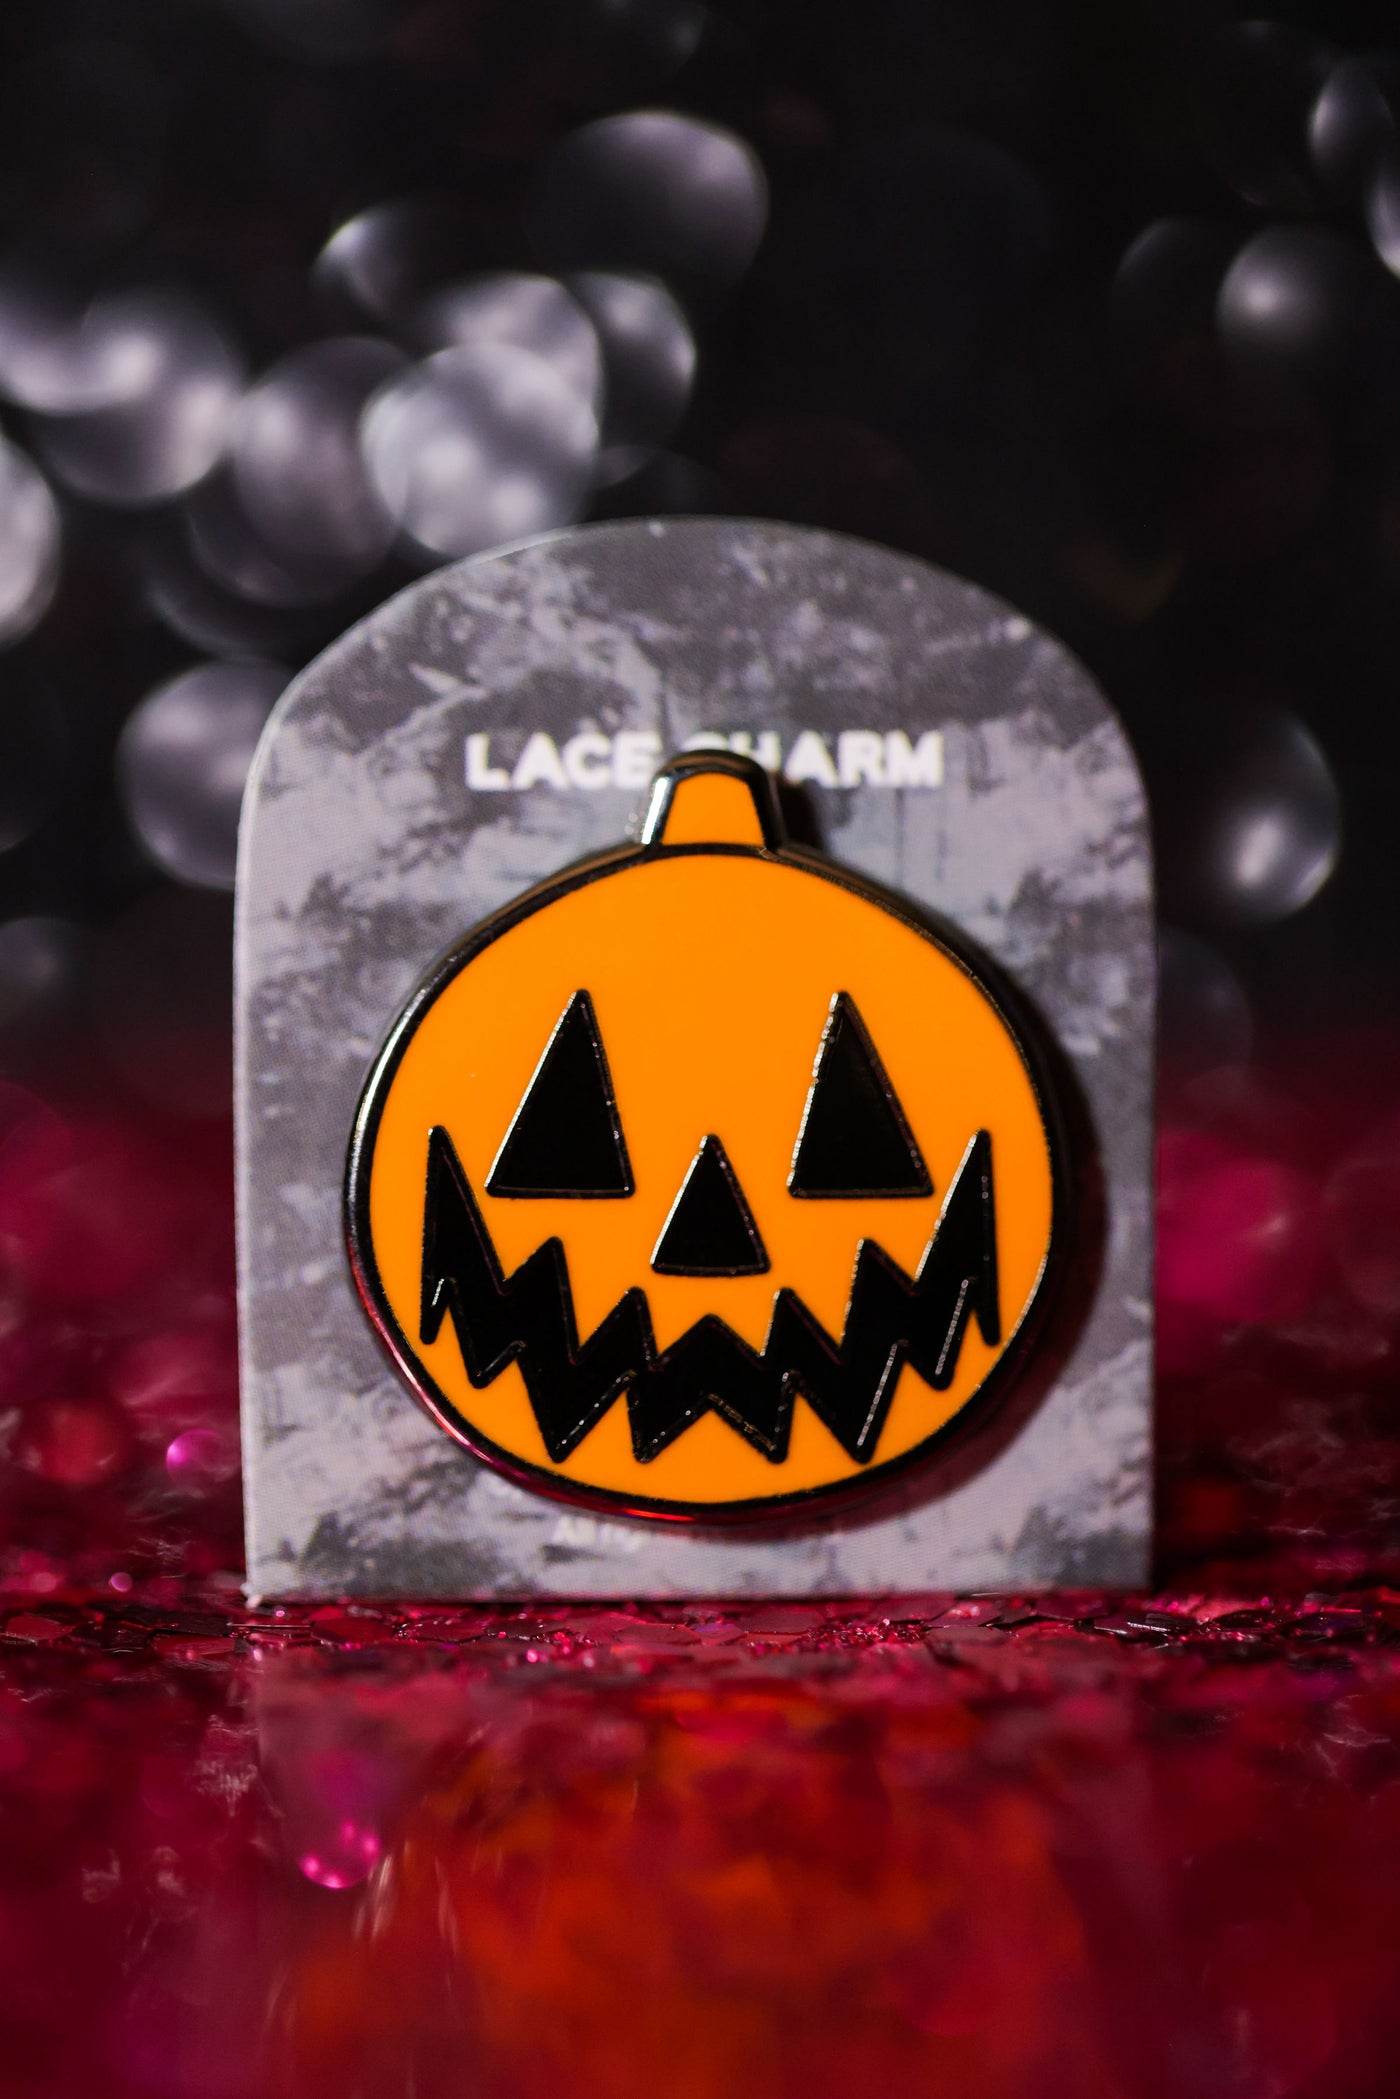 Jack-o'-lantern Lace Charm - Cute Halloween Collection